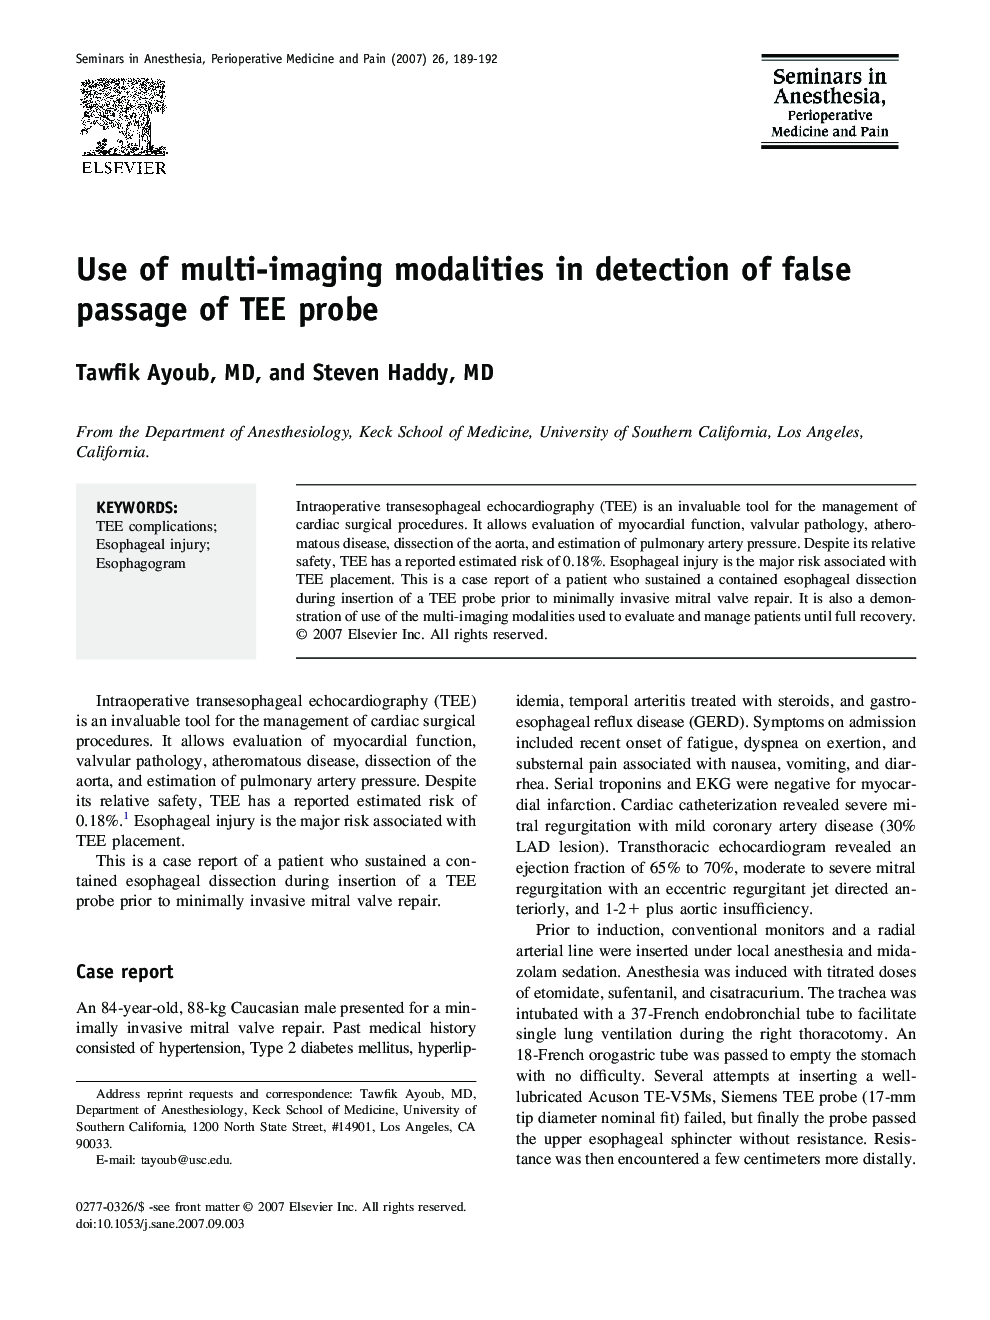 Use of multi-imaging modalities in detection of false passage of TEE probe